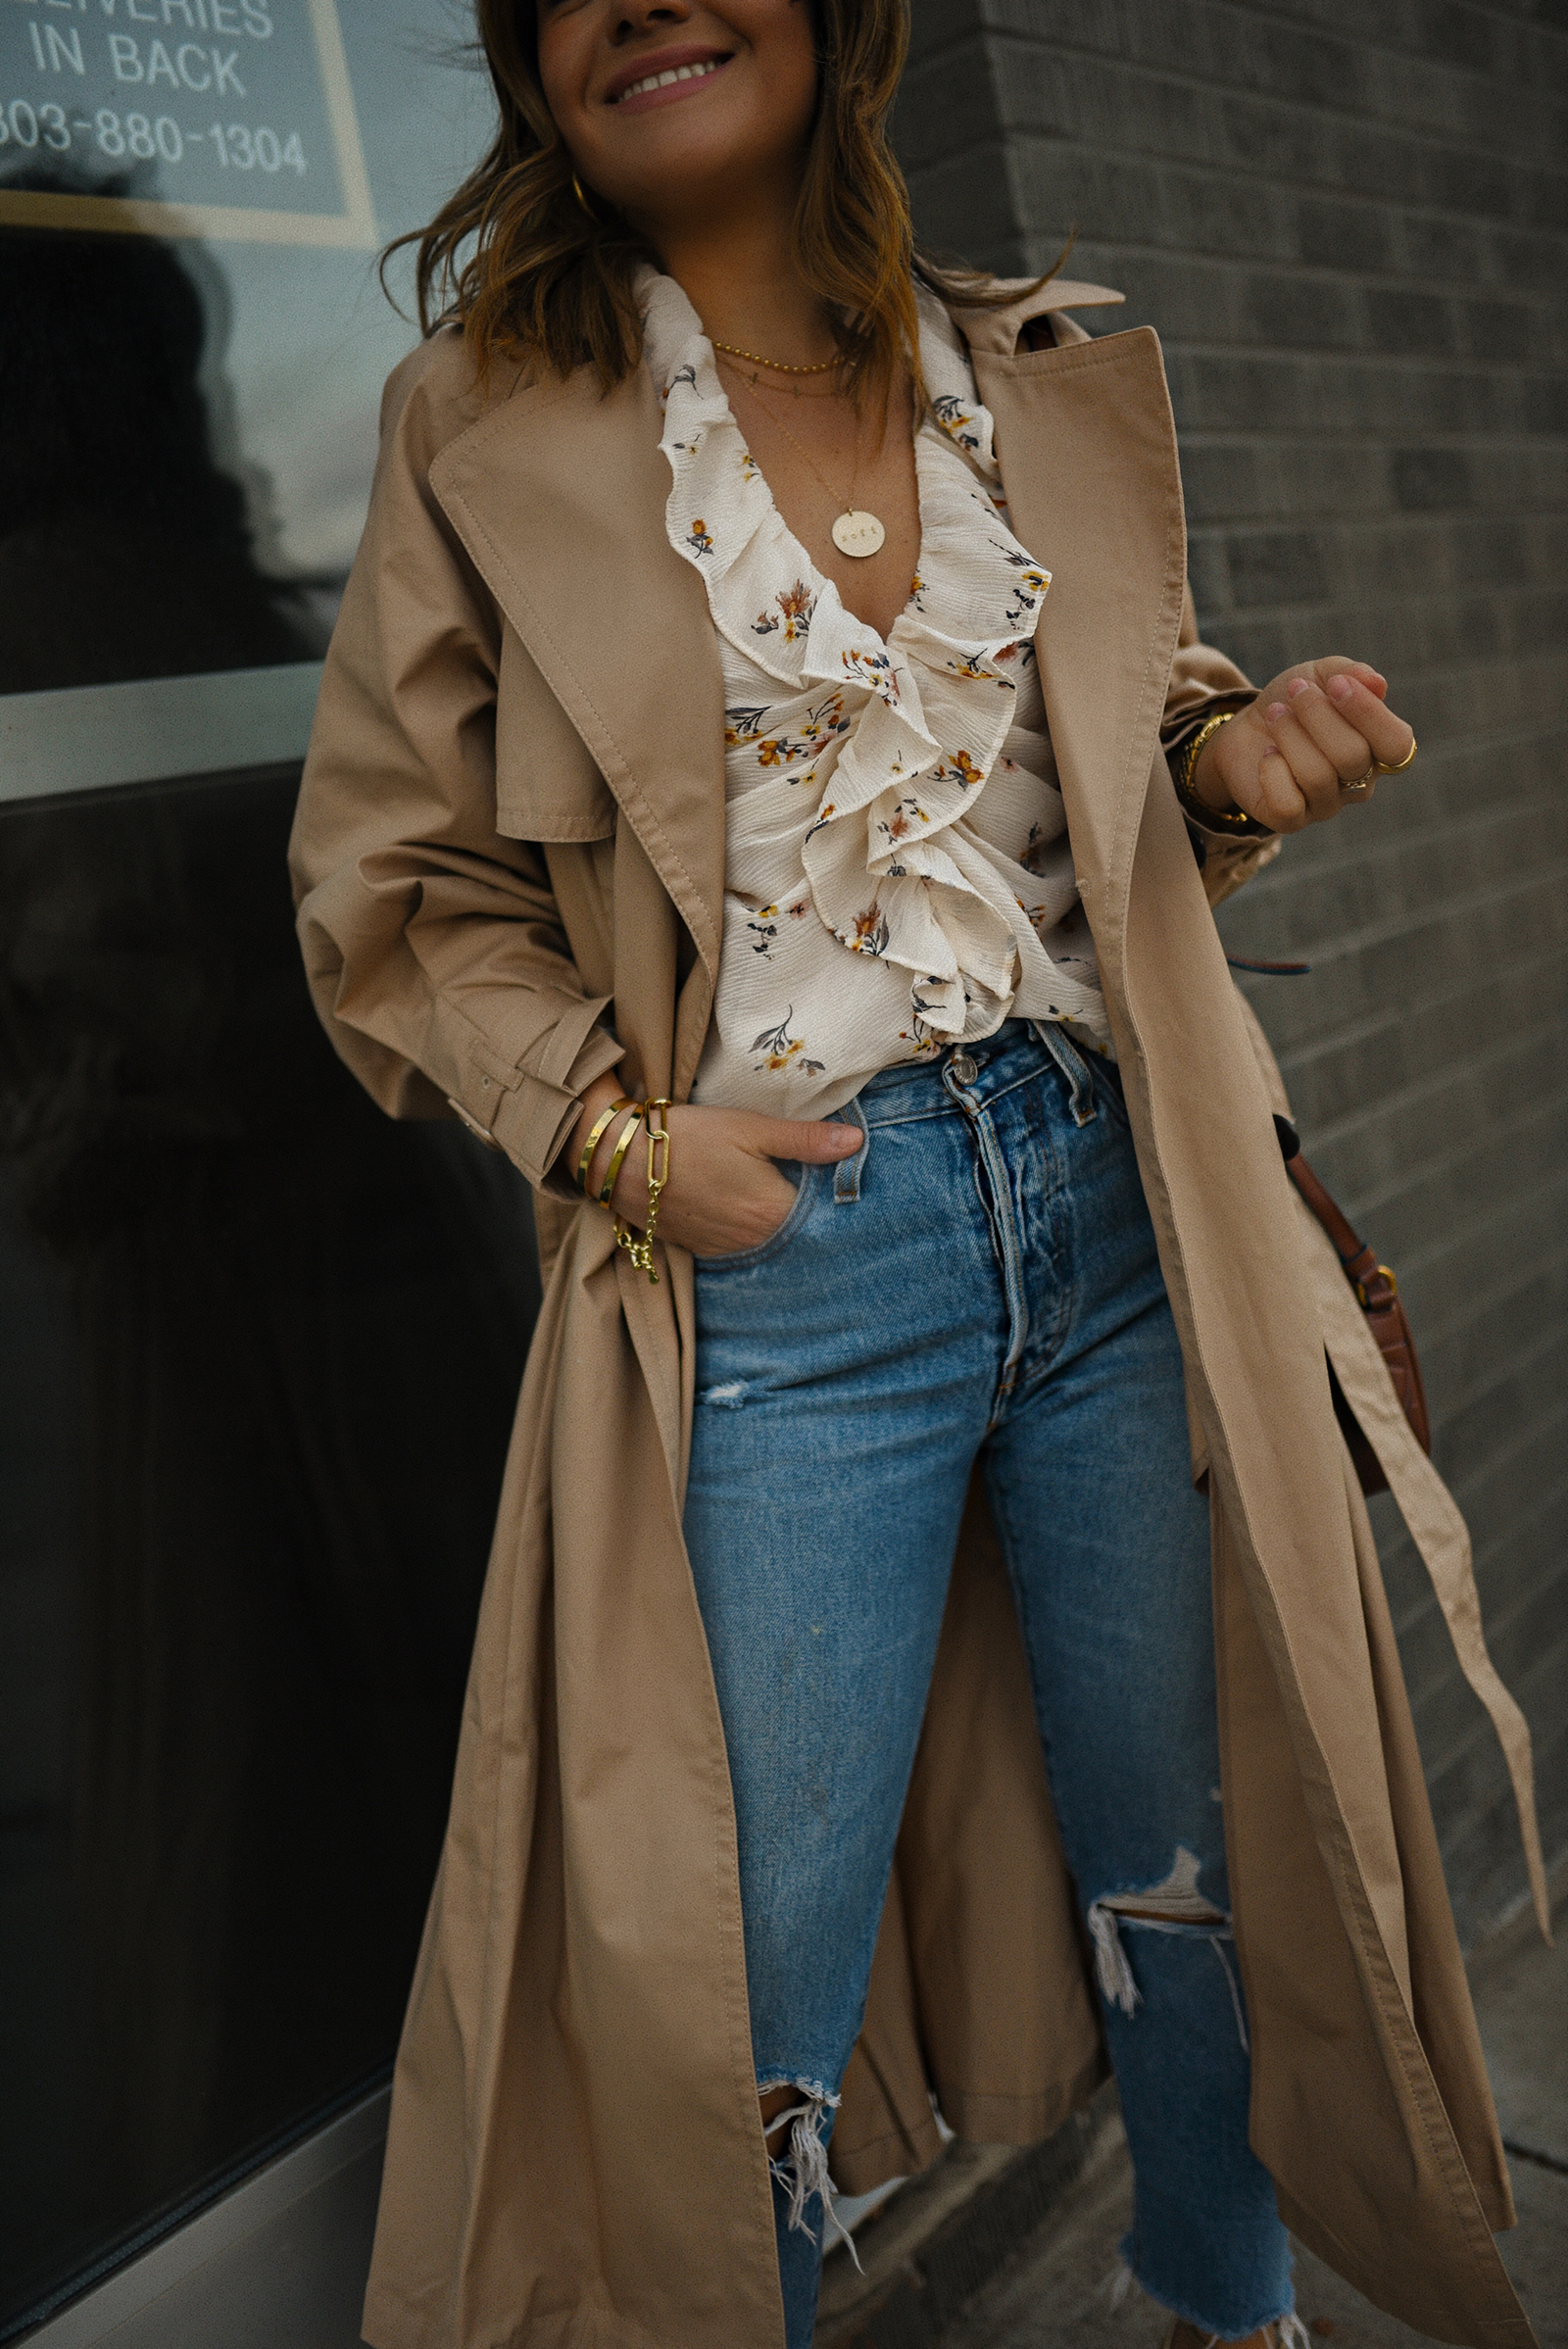 Carolina Hellal of Chic Talk wearing a trench coat via Express, Levi's skinny jeans, Vince Camuto gold sandals and Marc Jacobs crossbody bag. 